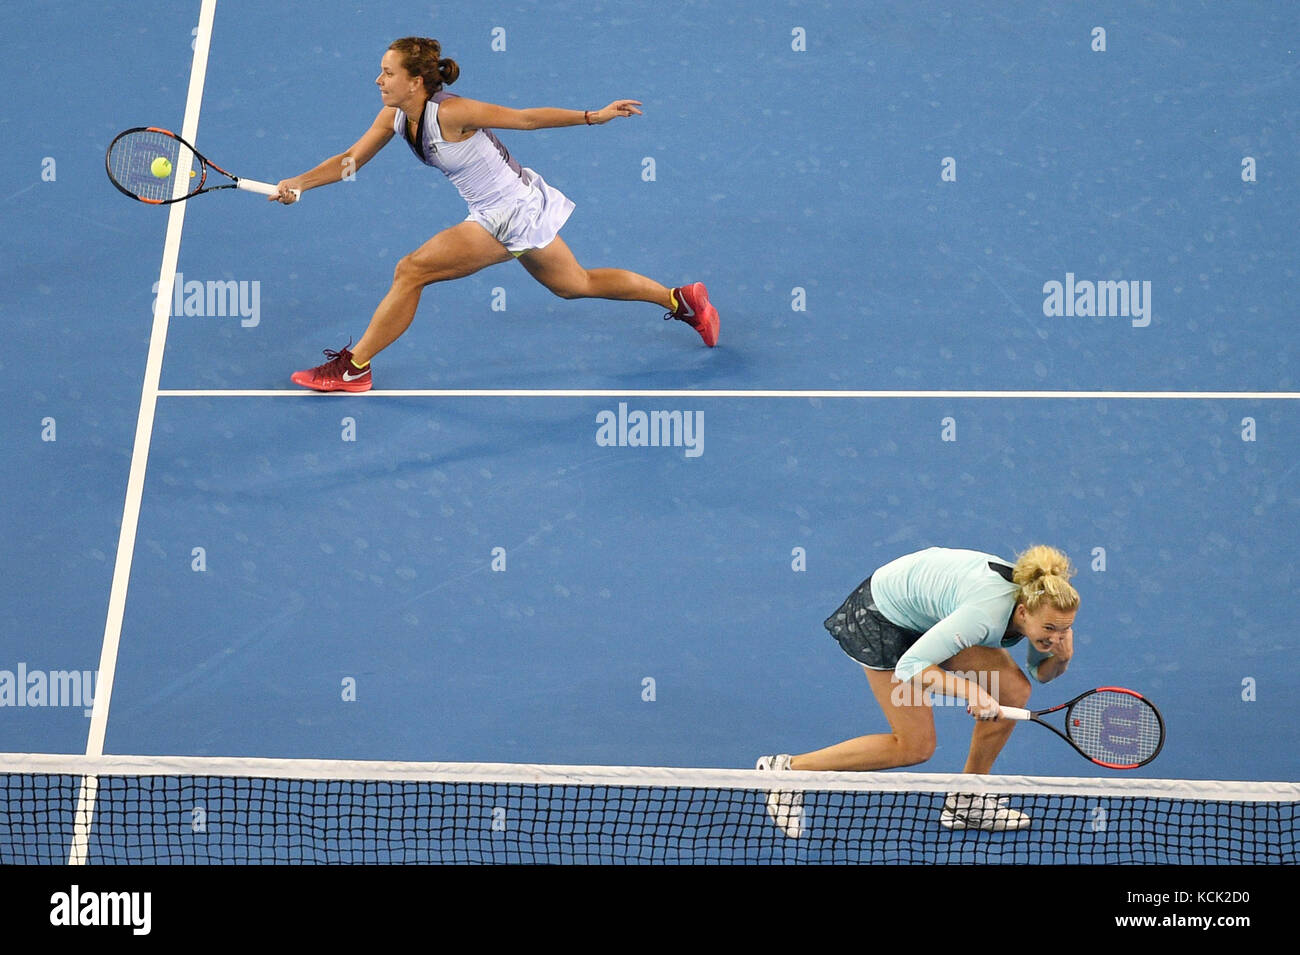 Beijing, China. 6th Oct, 2017. Katerina Siniakova/Barbora Strycova (L) of the Czech Republic compete during the women's doubles quarter-final match against China's Peng Shuai/India's Sania Mirza at the China Open tennis tournament in Beijing on Oct. 6, 2017. Credit: Ju Huanzong/Xinhua/Alamy Live News Stock Photo